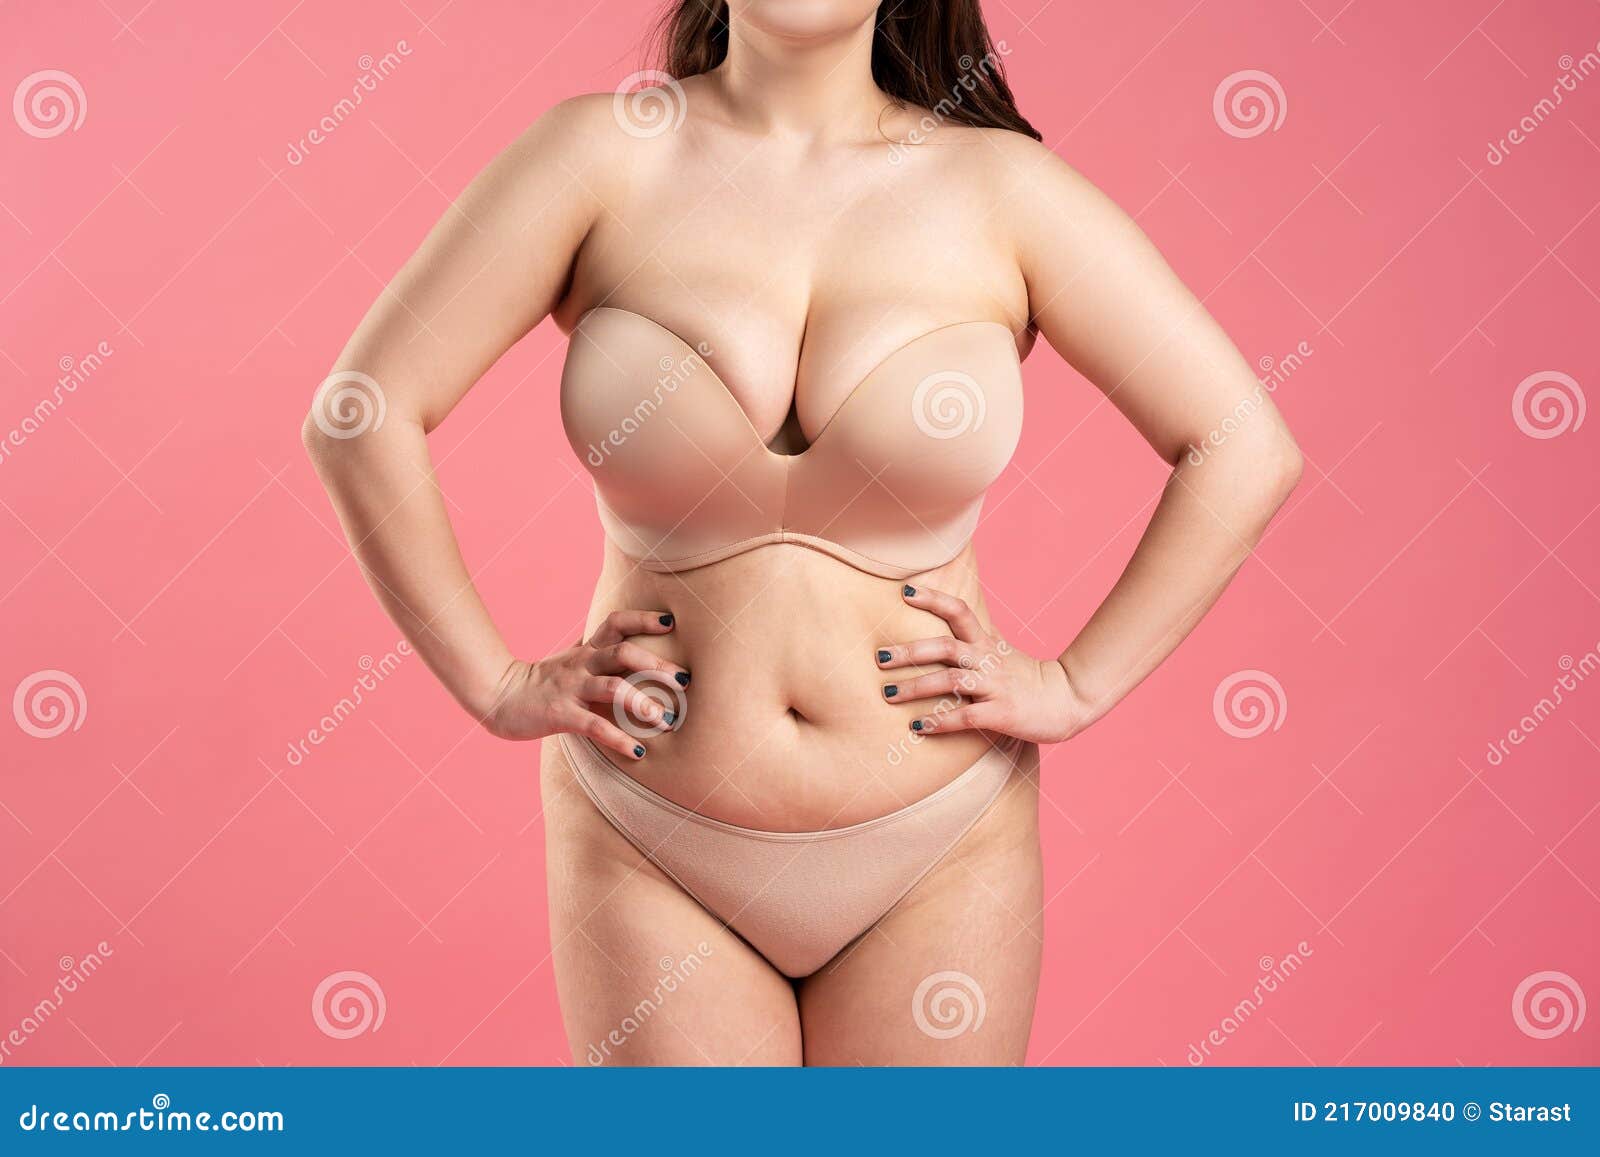 Fat Woman with Large Breasts in a Push-up Bra on Pink Background, Overweight Female Body Stock Photo photo